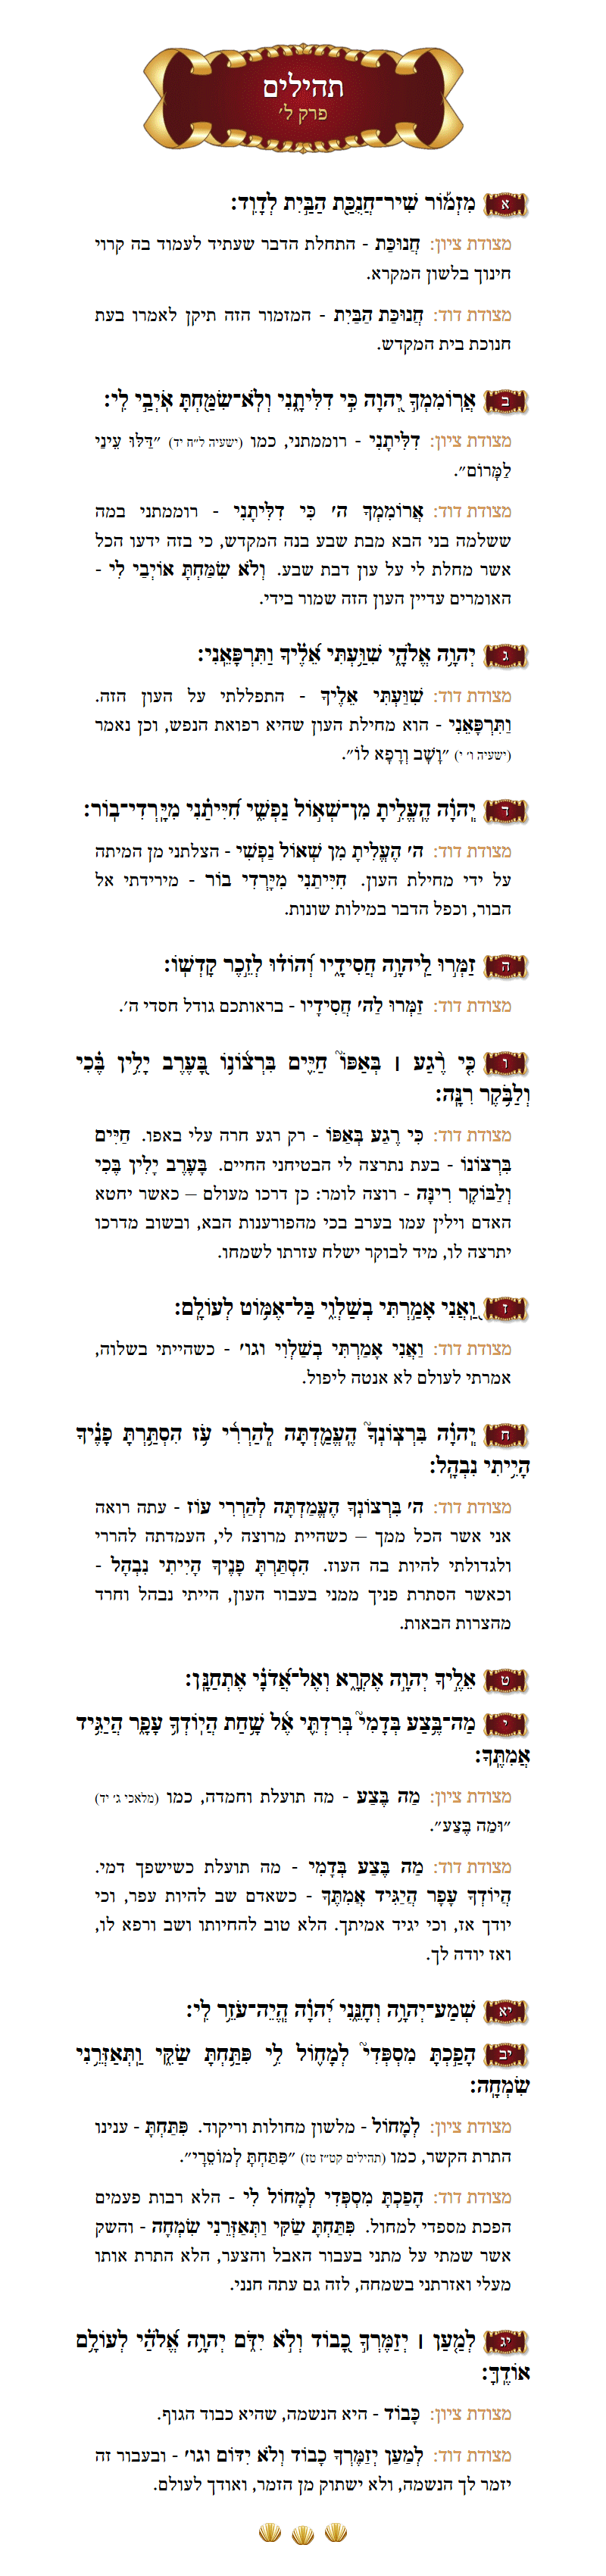 Sefer Tehillim Chapter 30 with commentary